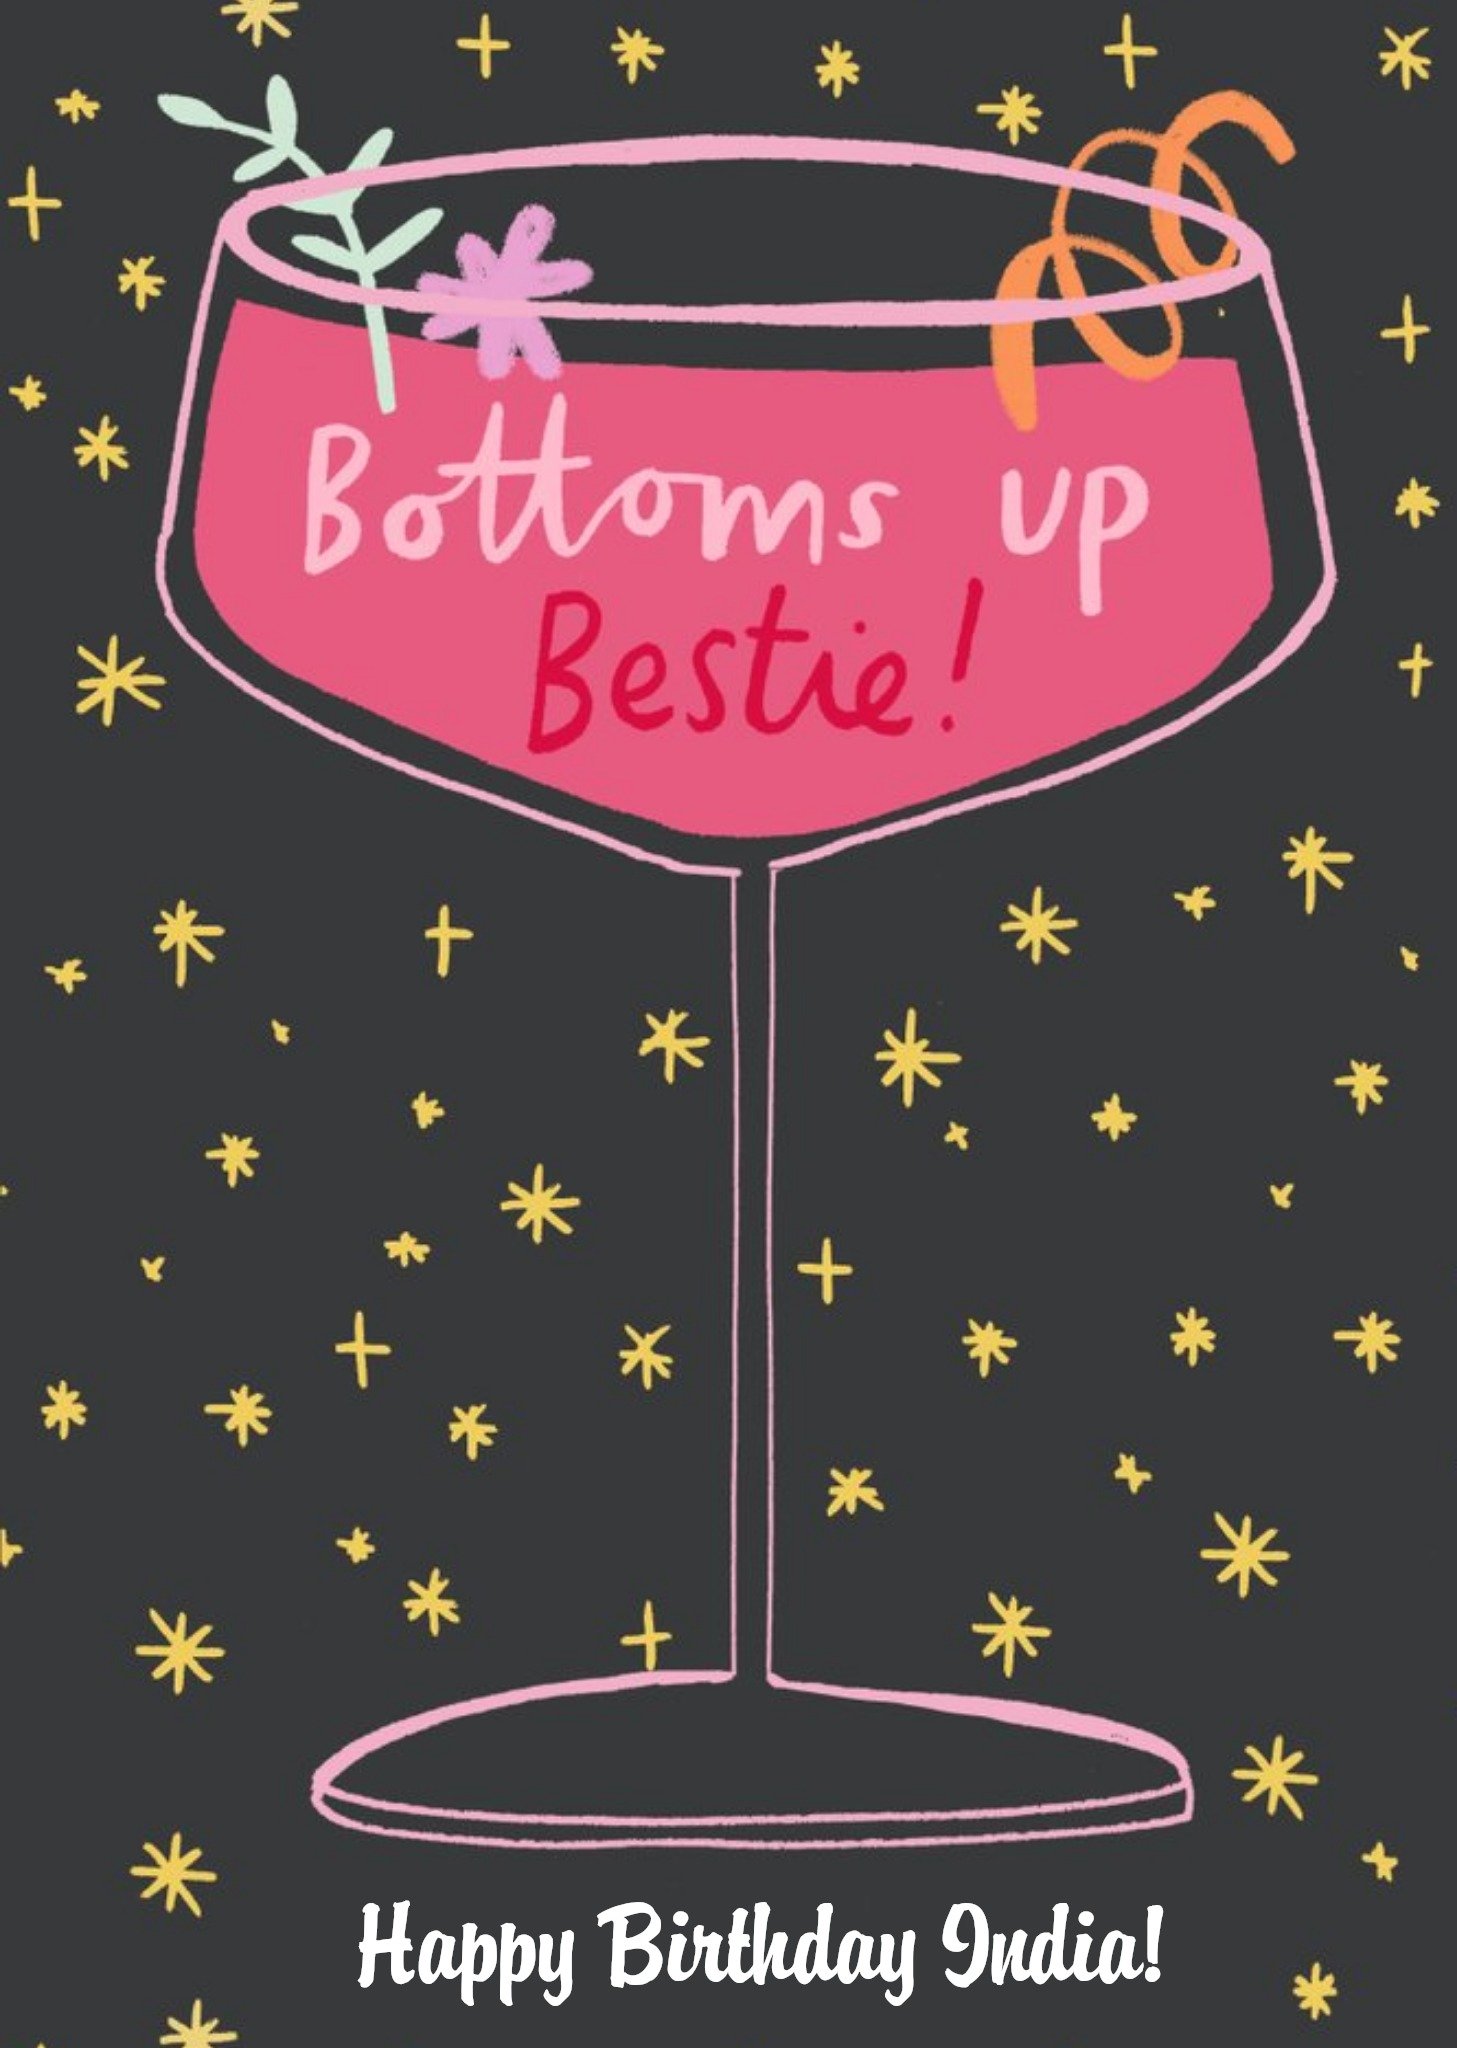 Moonpig Cute Cocktail Bottoms Up Bestie Birthday Card, Large